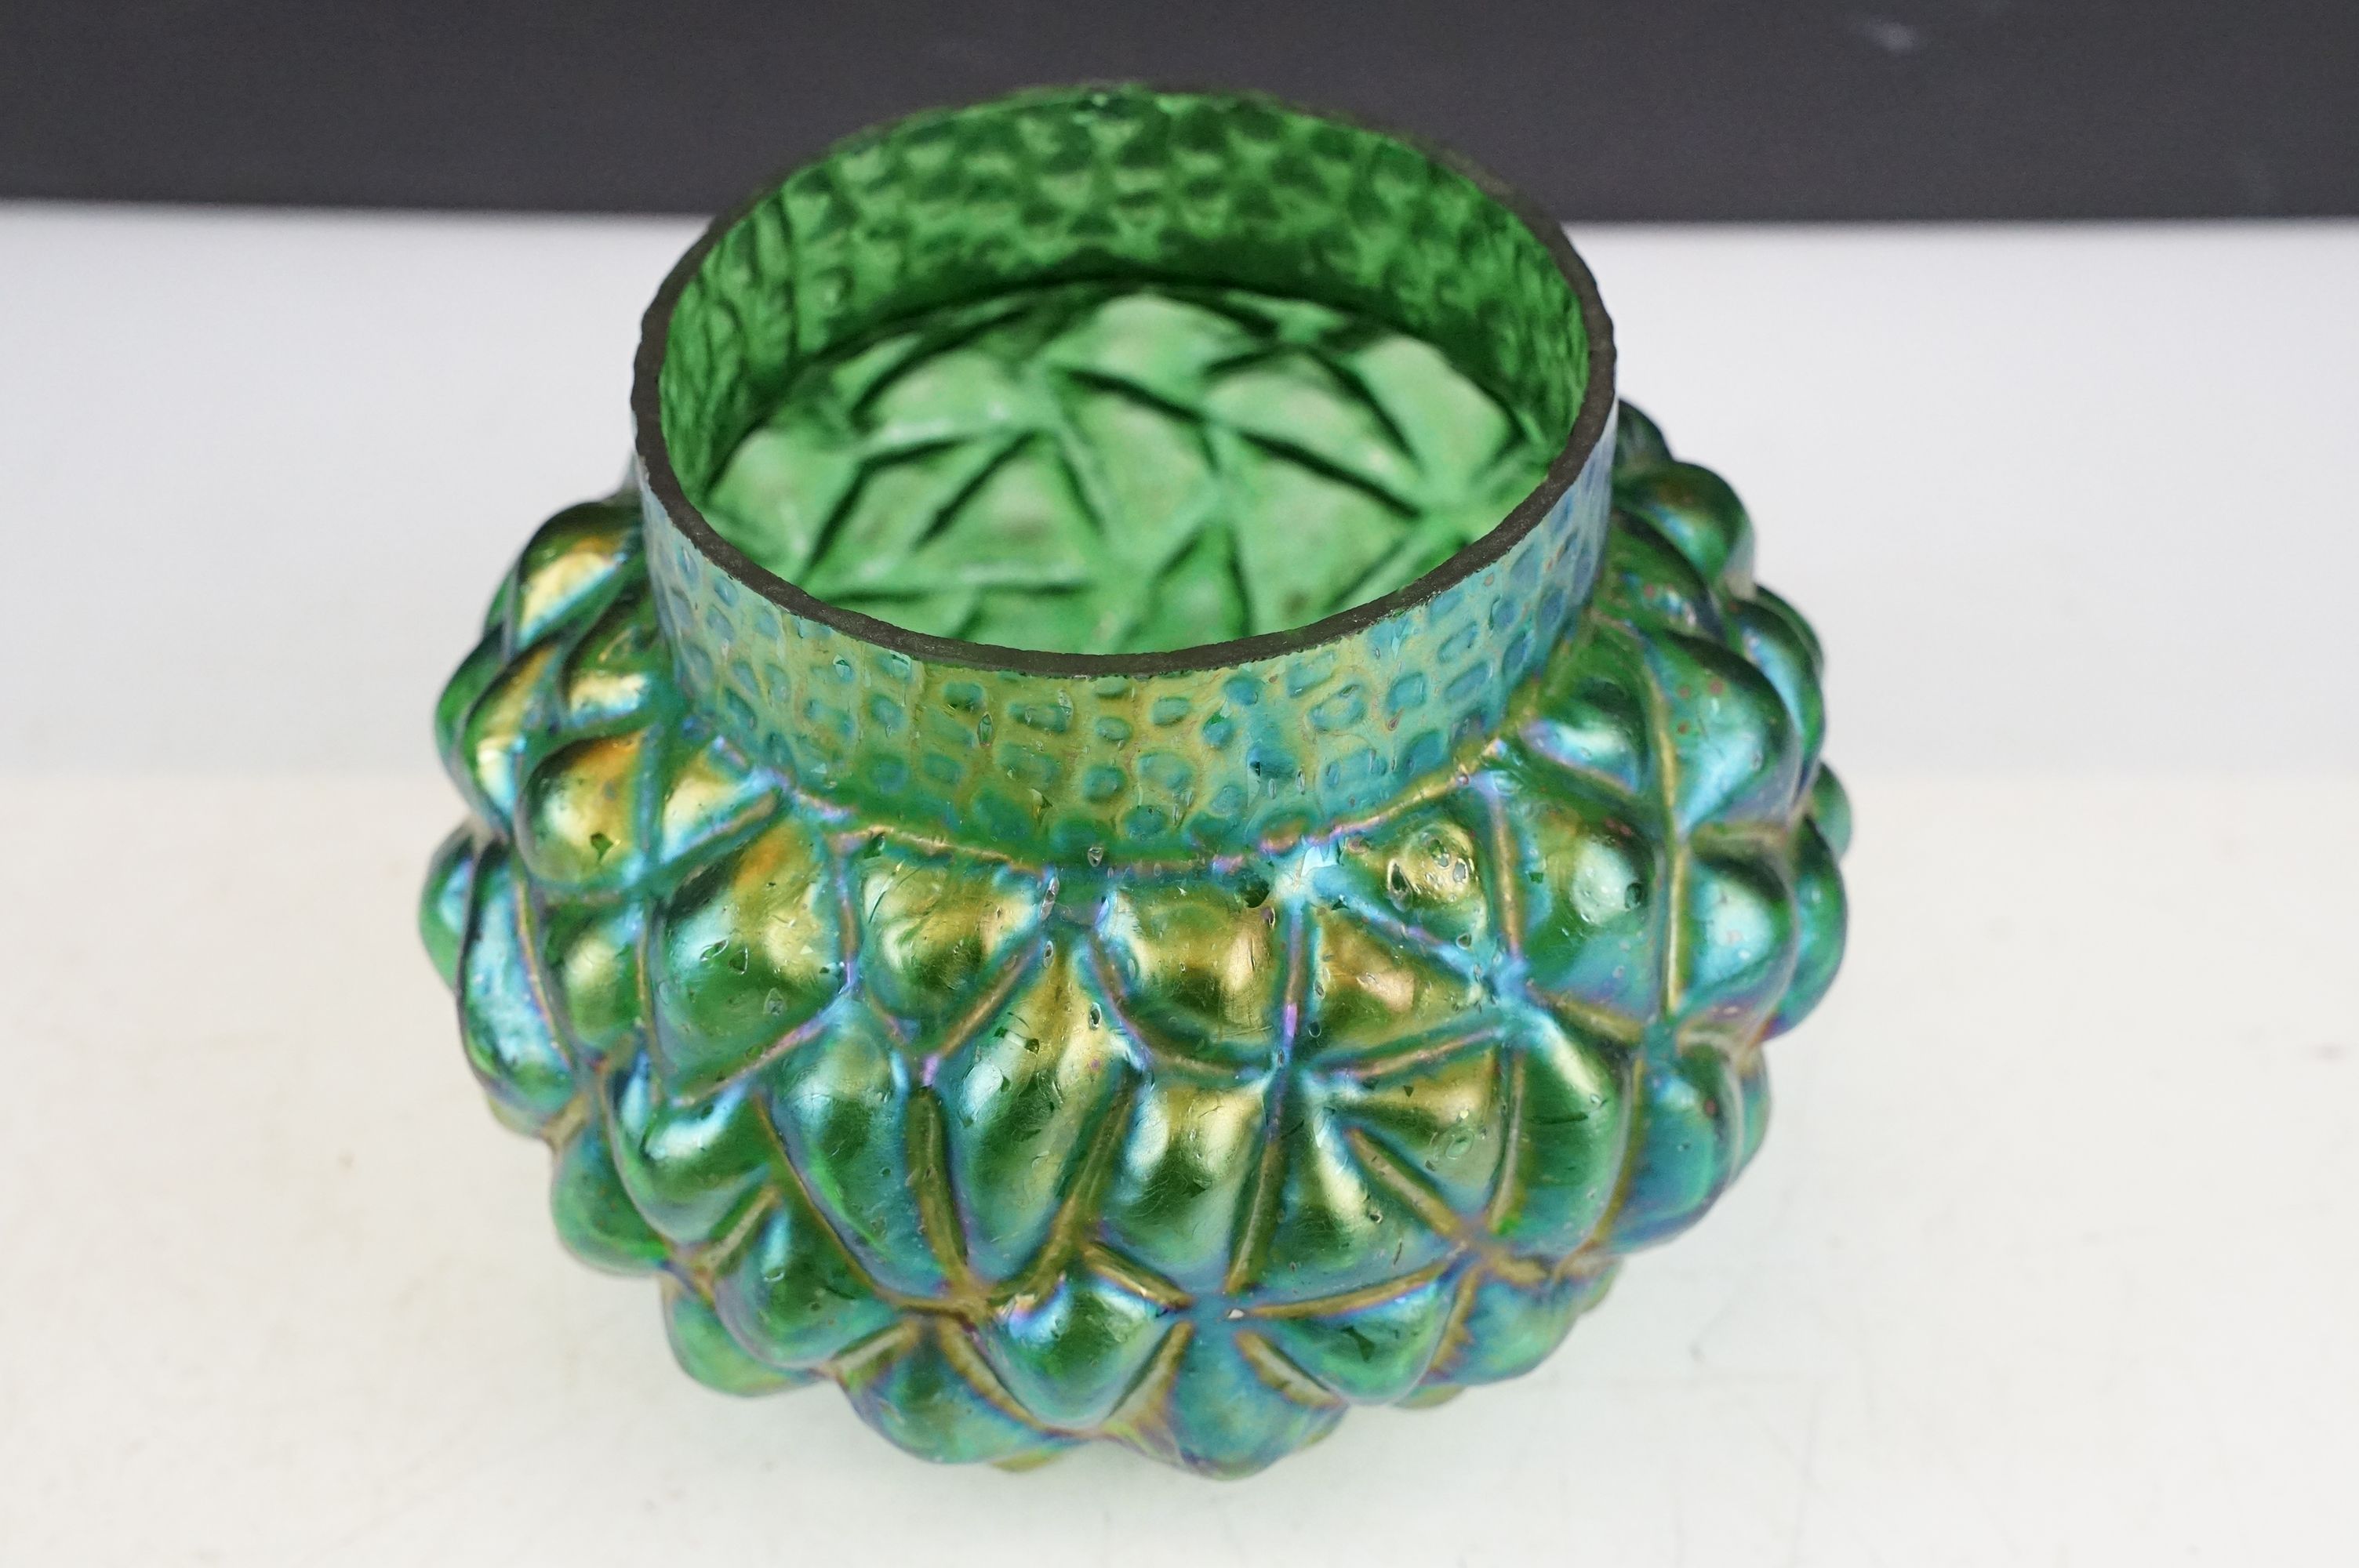 Two early 20th century Kralik iridescent glass rose bowls to include a green glass textured - Image 11 of 14